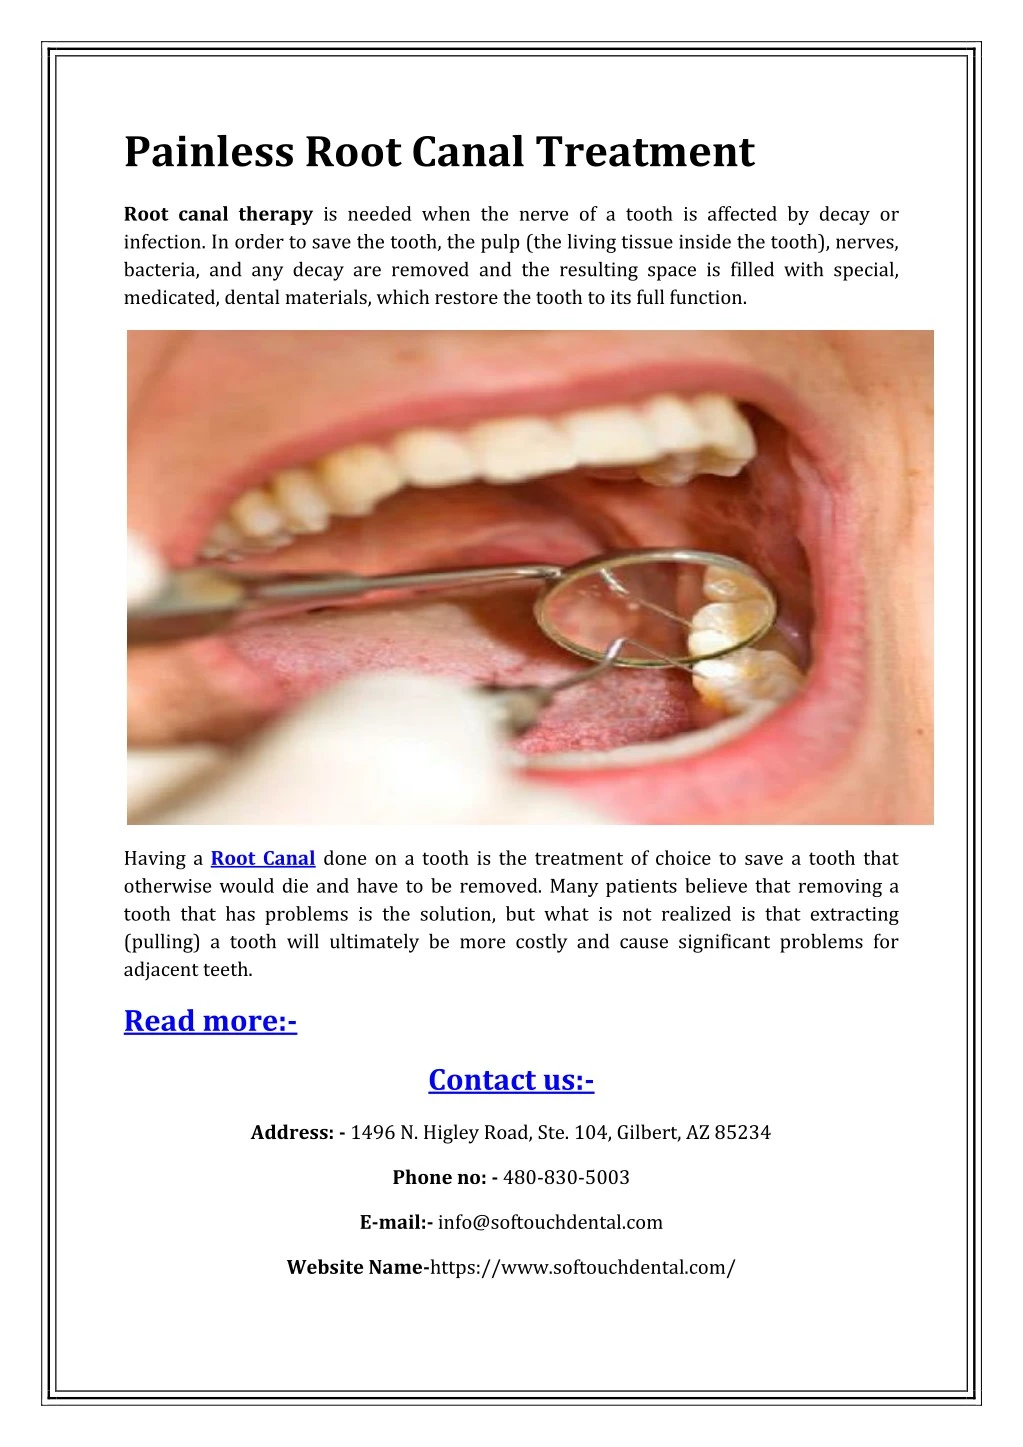 painless root canal treatment